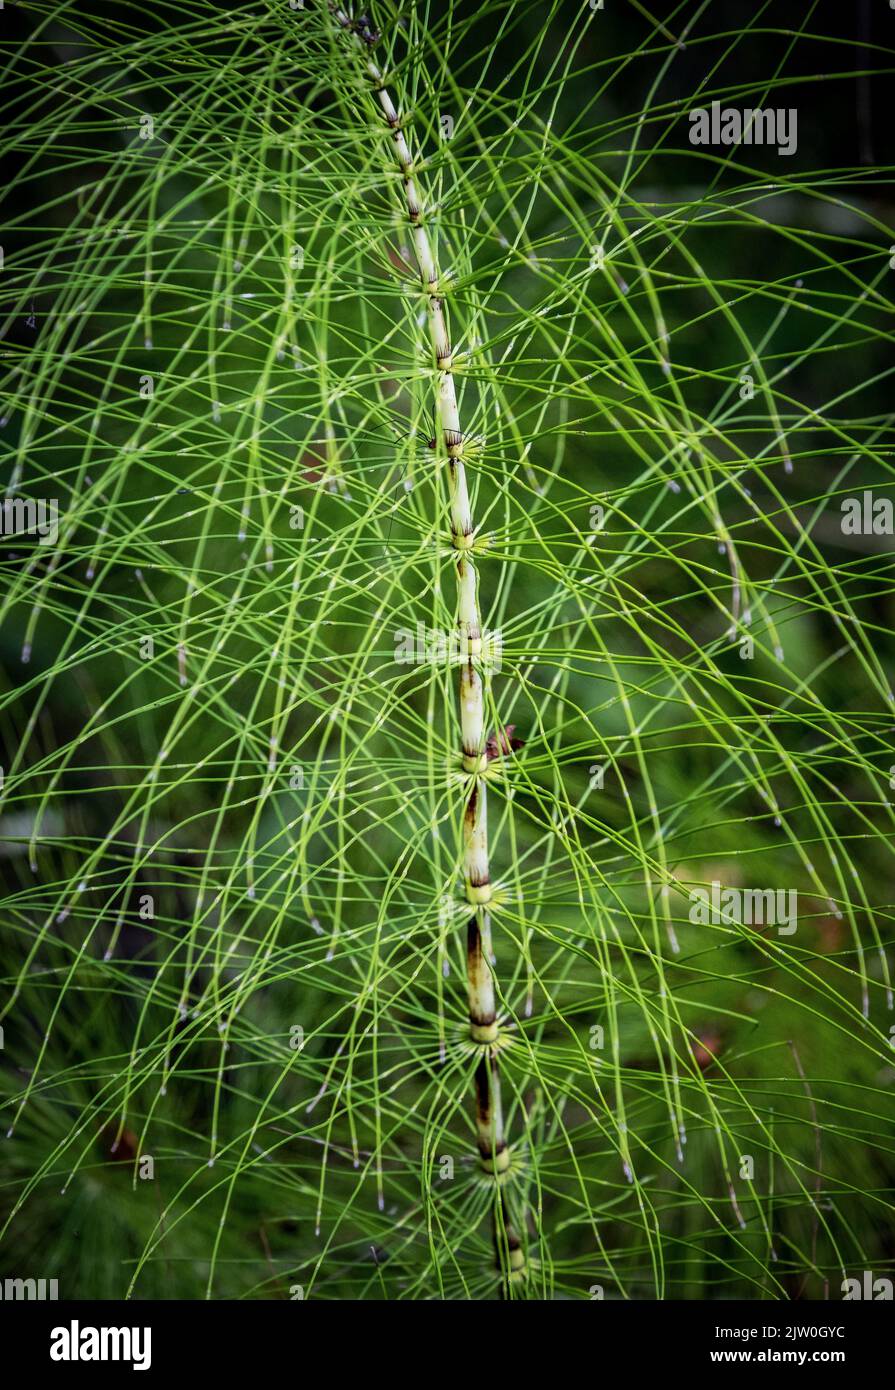 The Great Horsetail plant in full flower in marshland, Worcestershire, England. Stock Photo